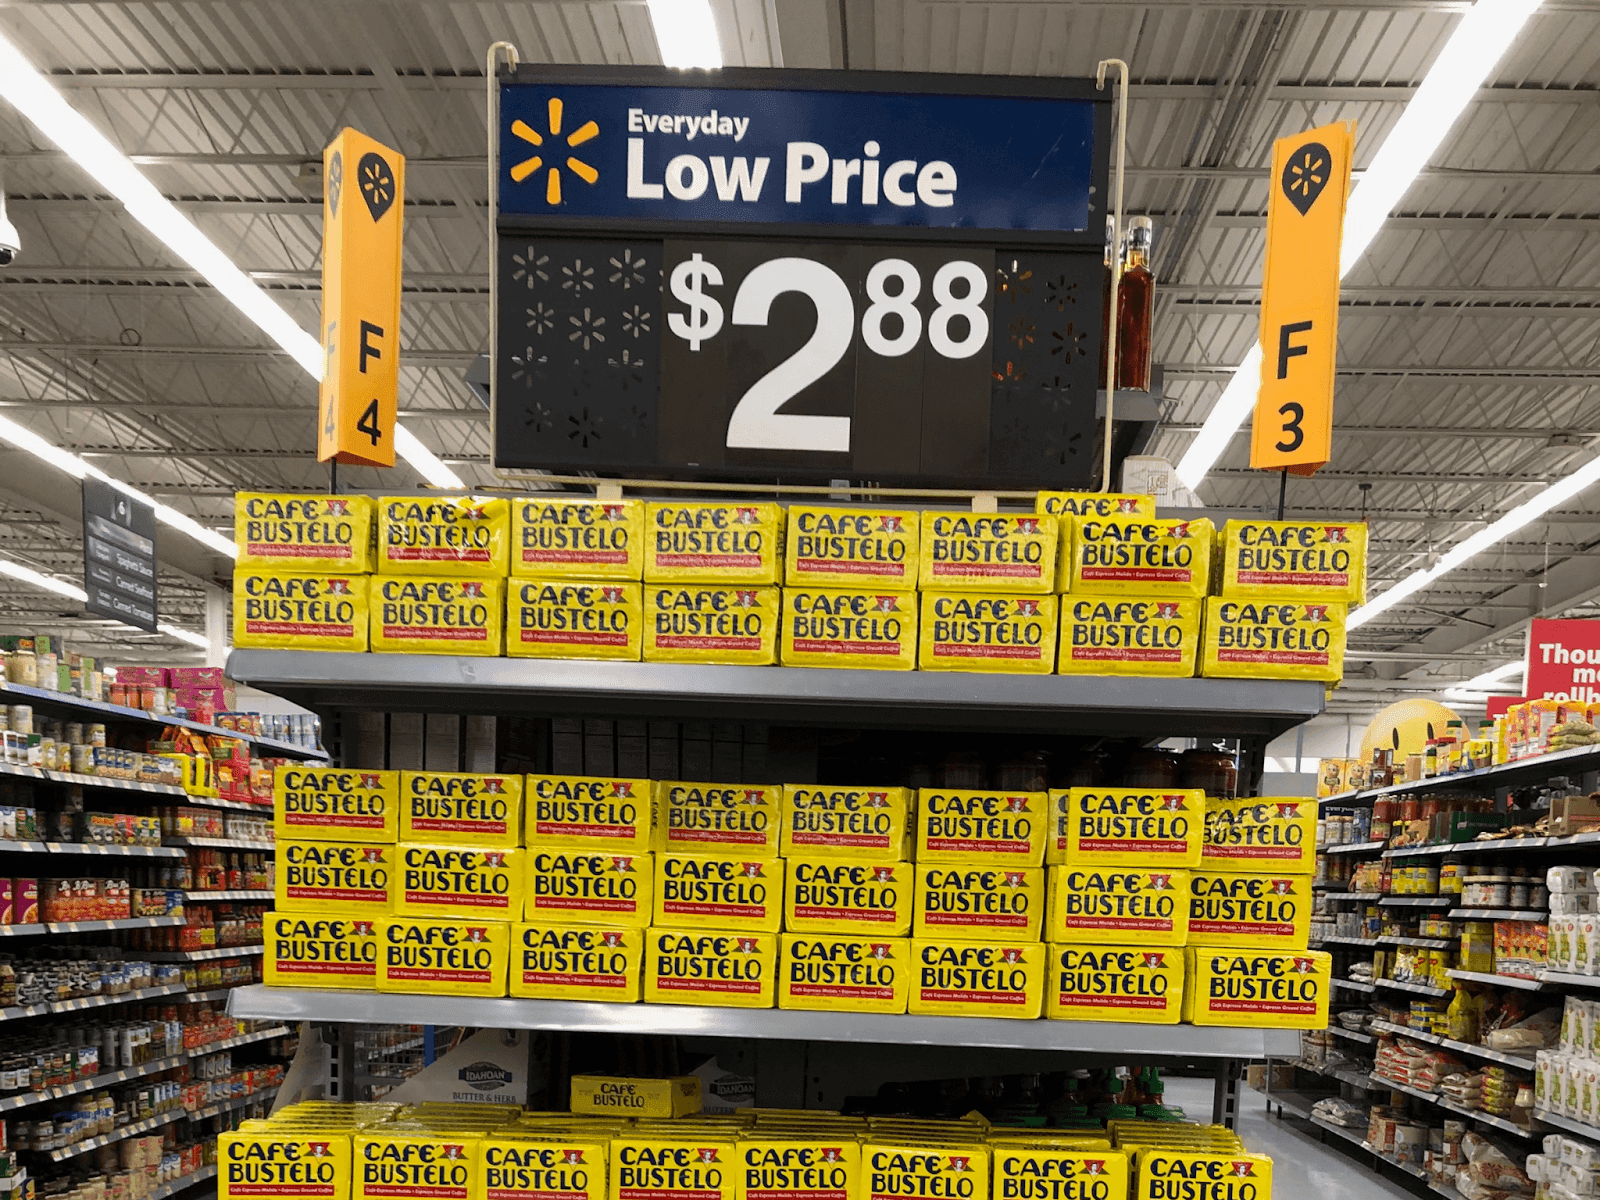 Walmart uses an everyday low pricing strategy